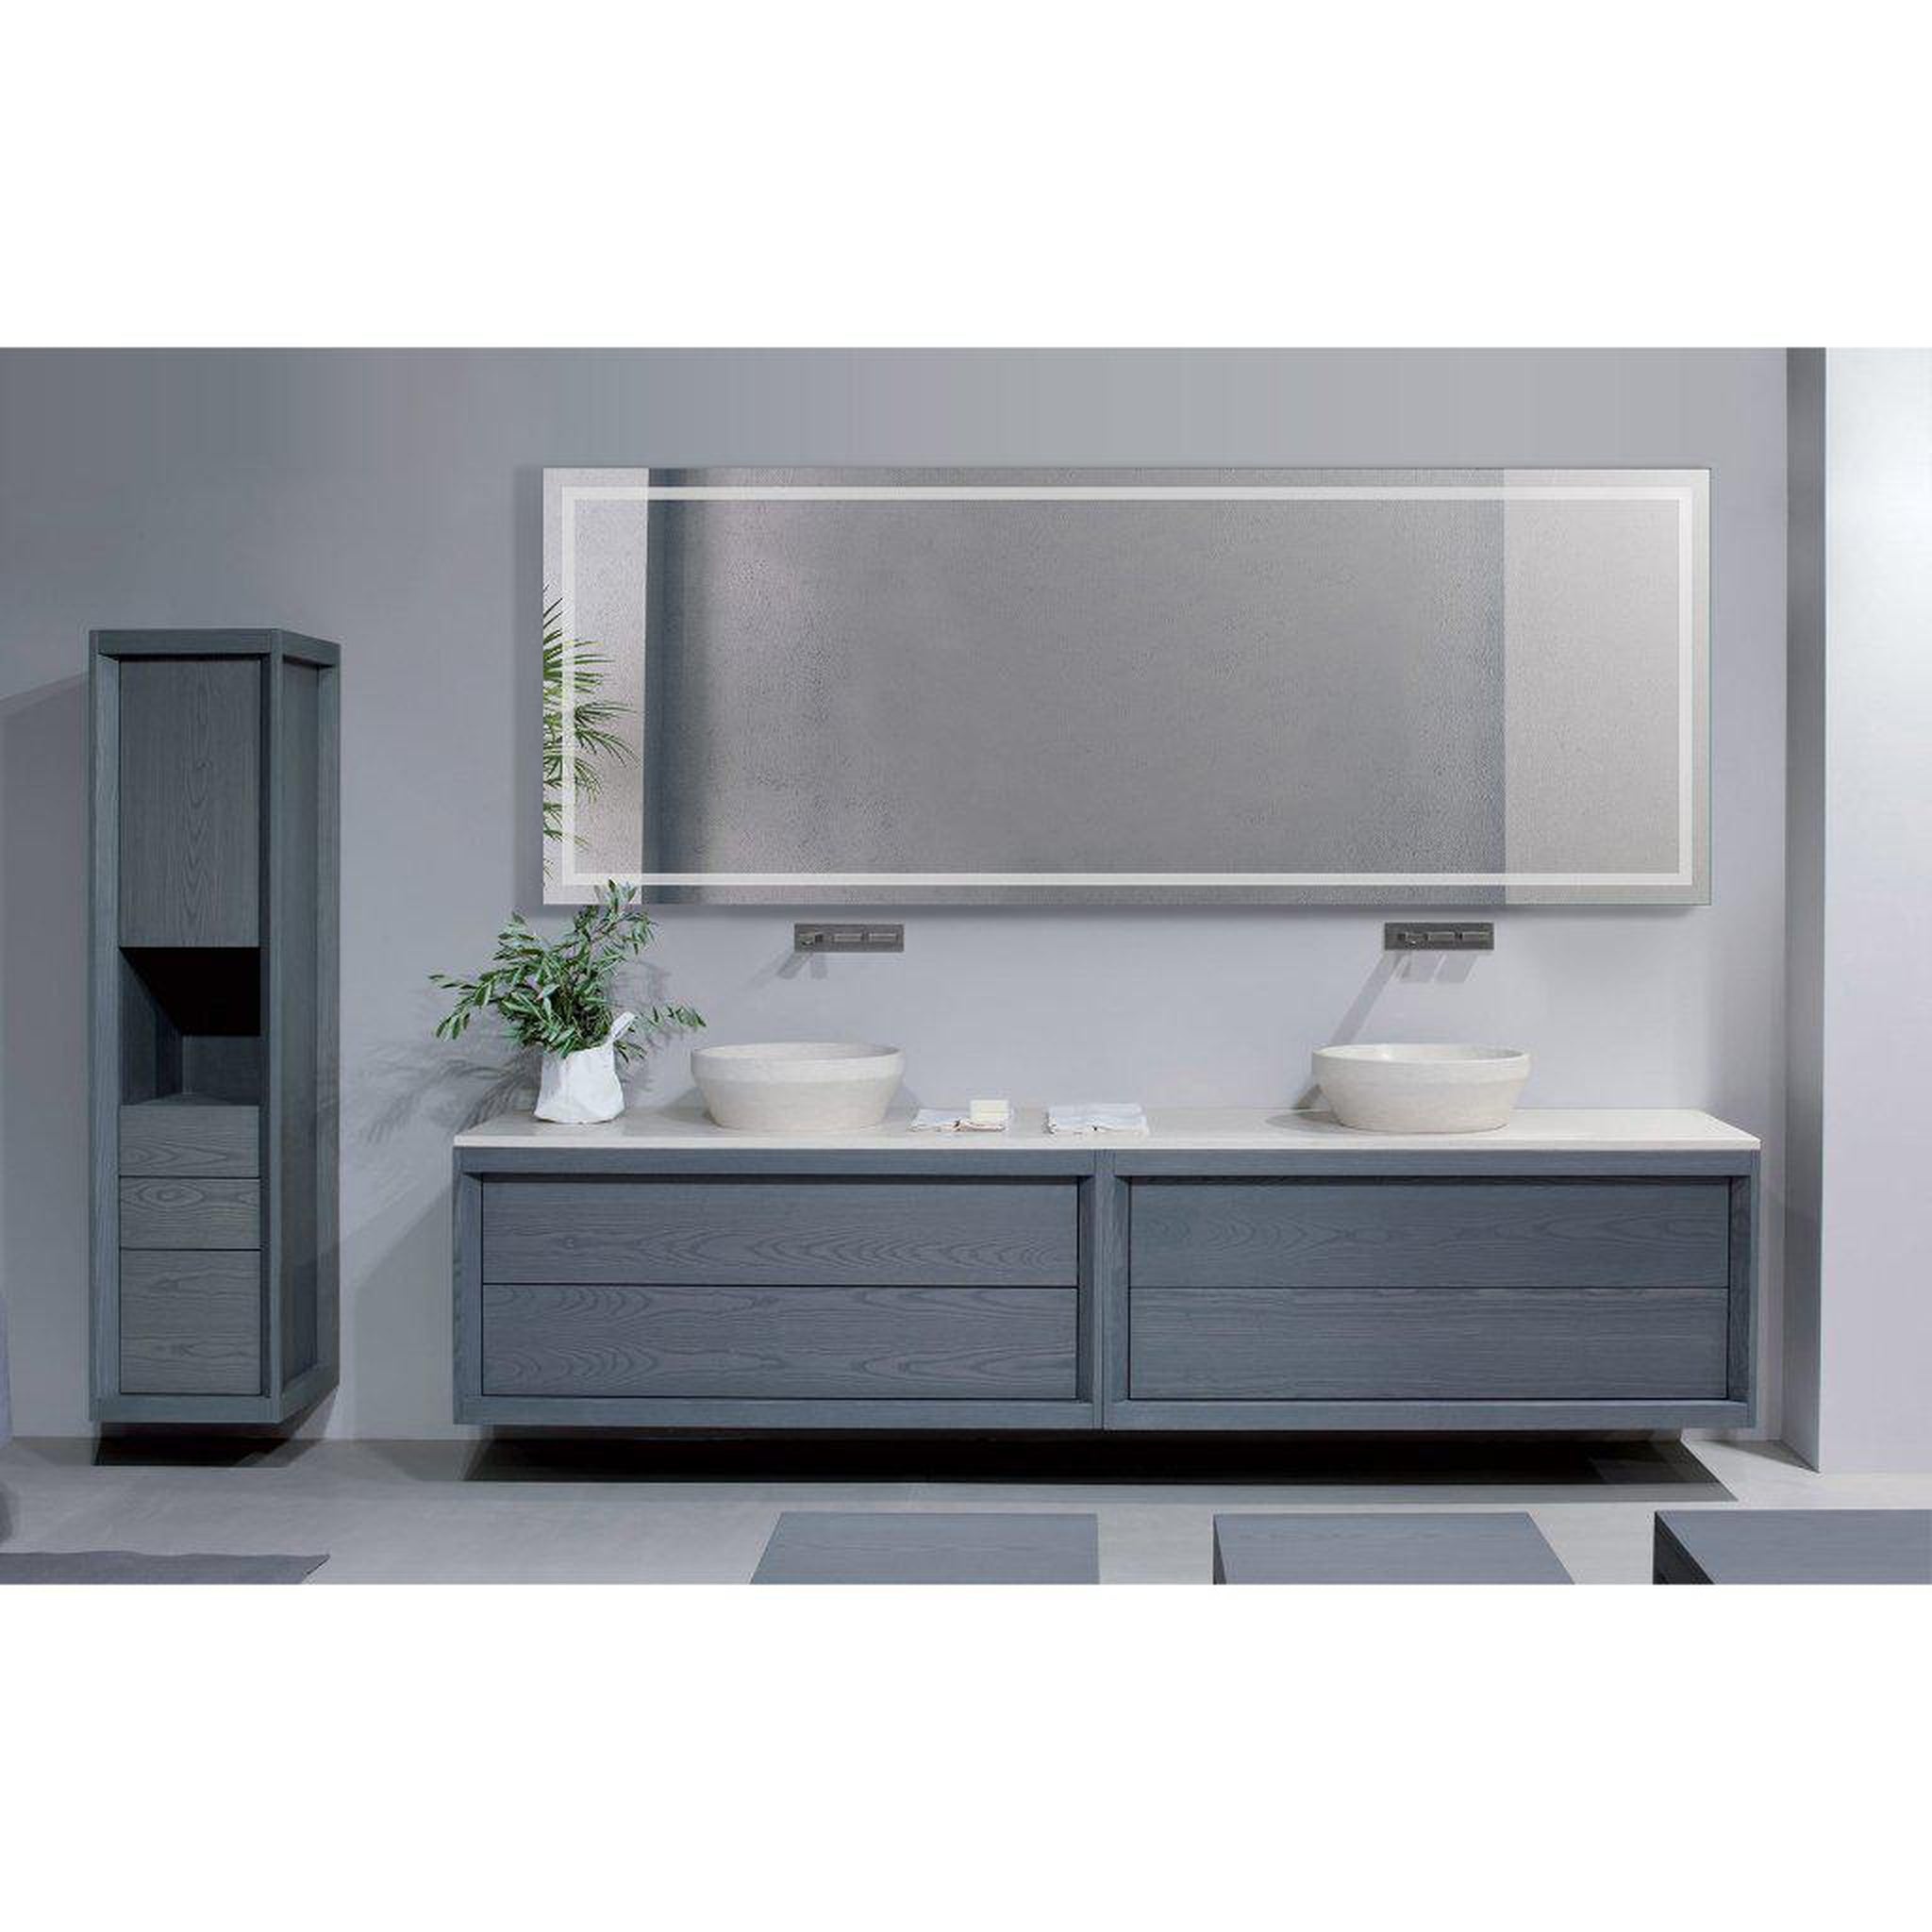 Krugg Reflections, Krugg Reflections Icon 96" x 36" 5000K Rectangular Wall-Mounted Lighted LED Mirror With Built-in Defogger